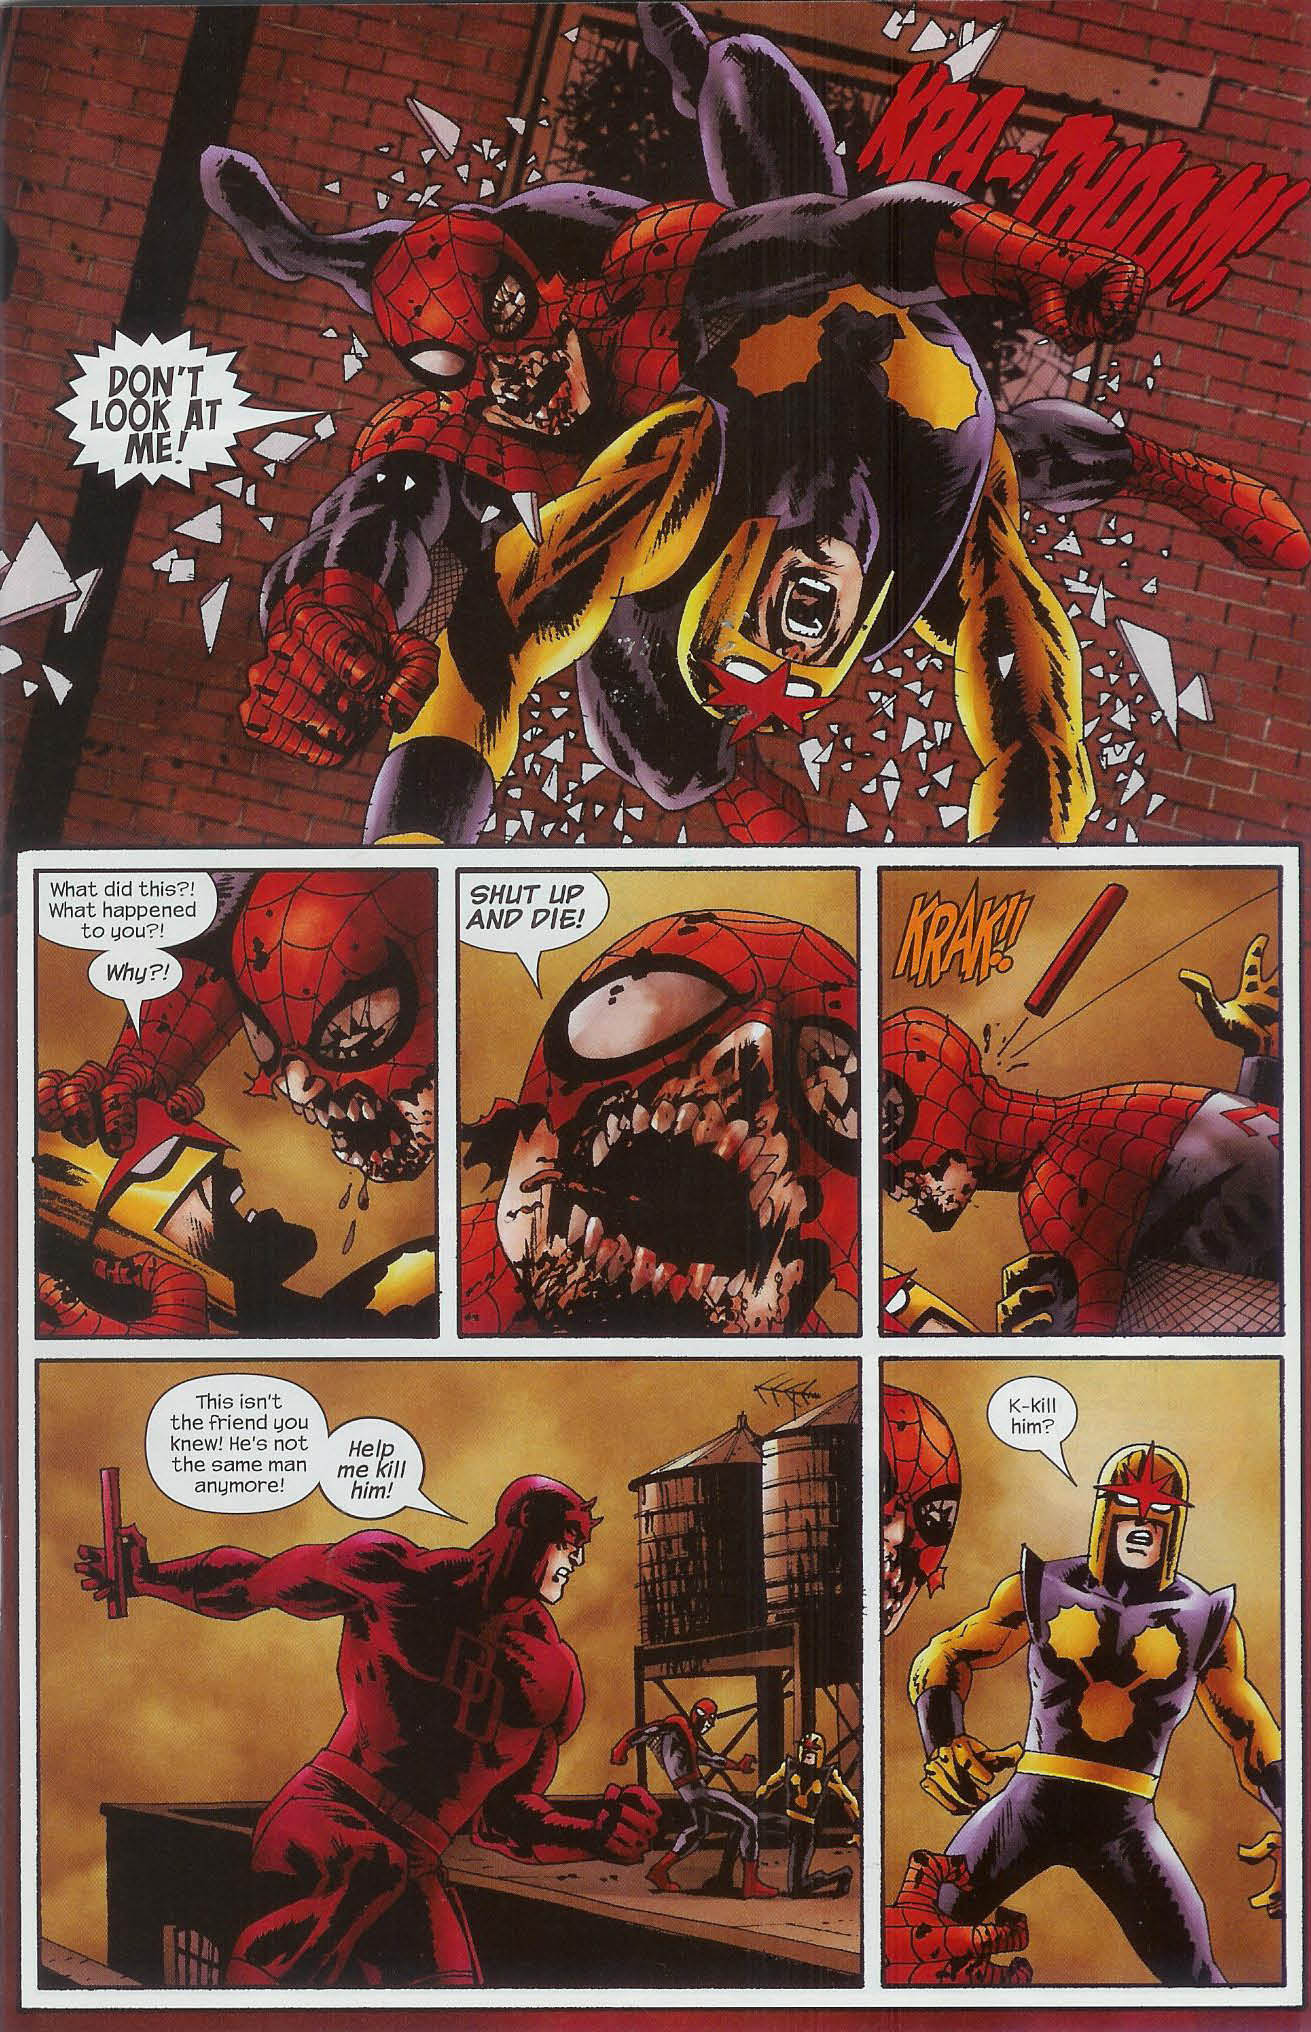 Marvel Zombies Dead Days - A